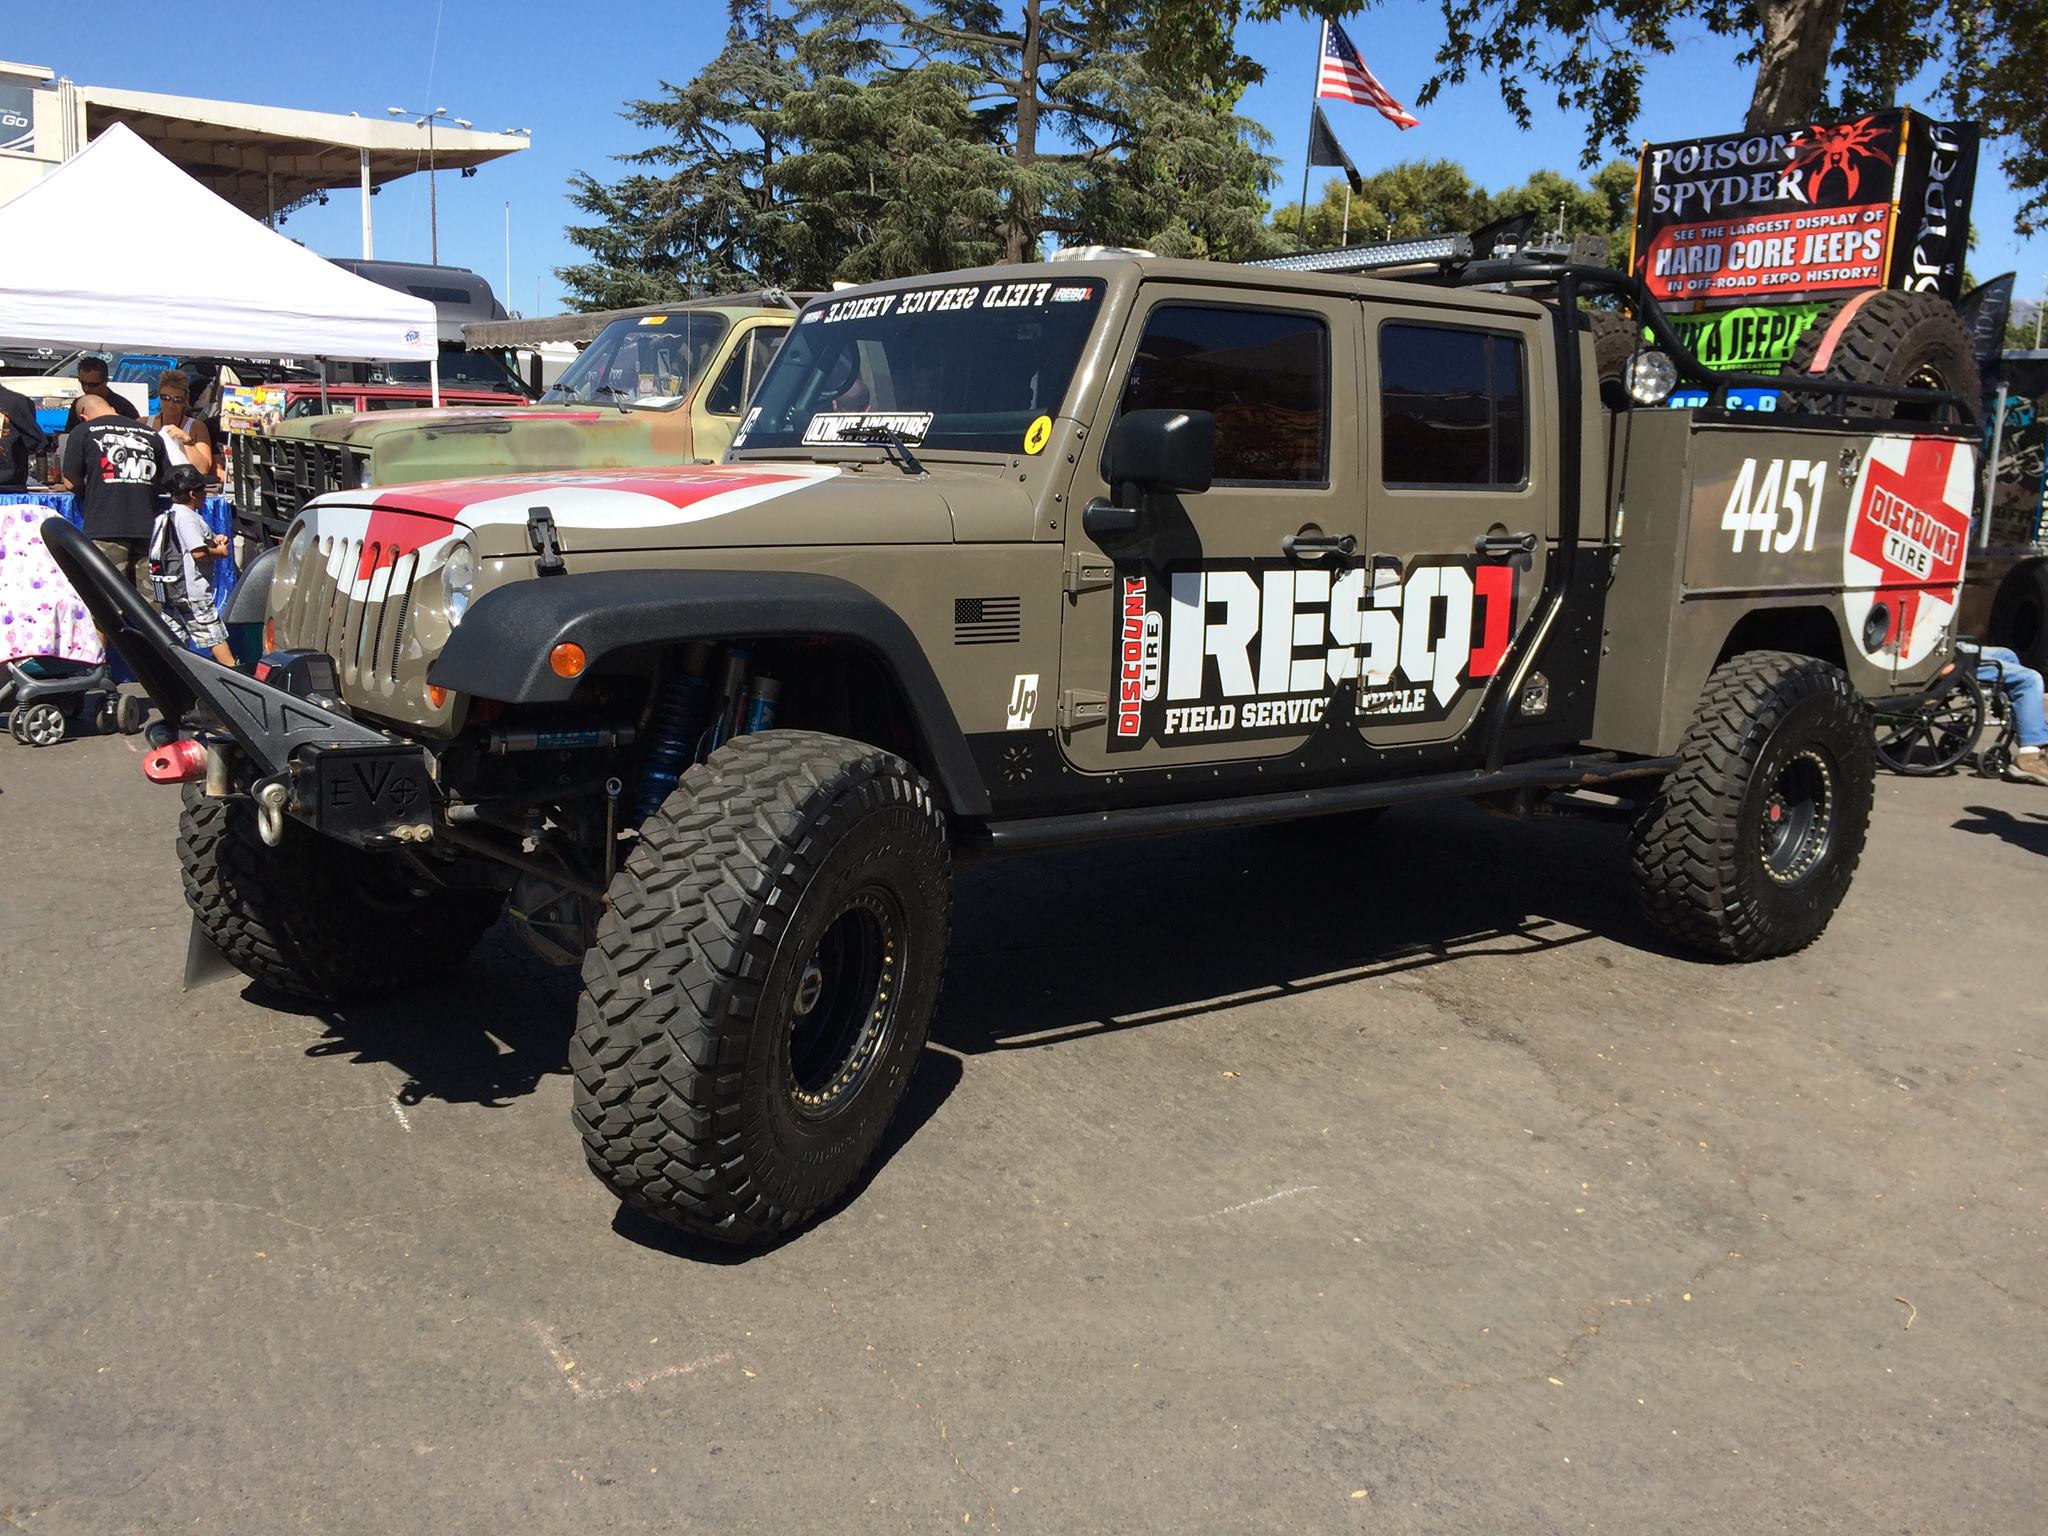 Resq1 From the Lucas Oil Off Road Expo